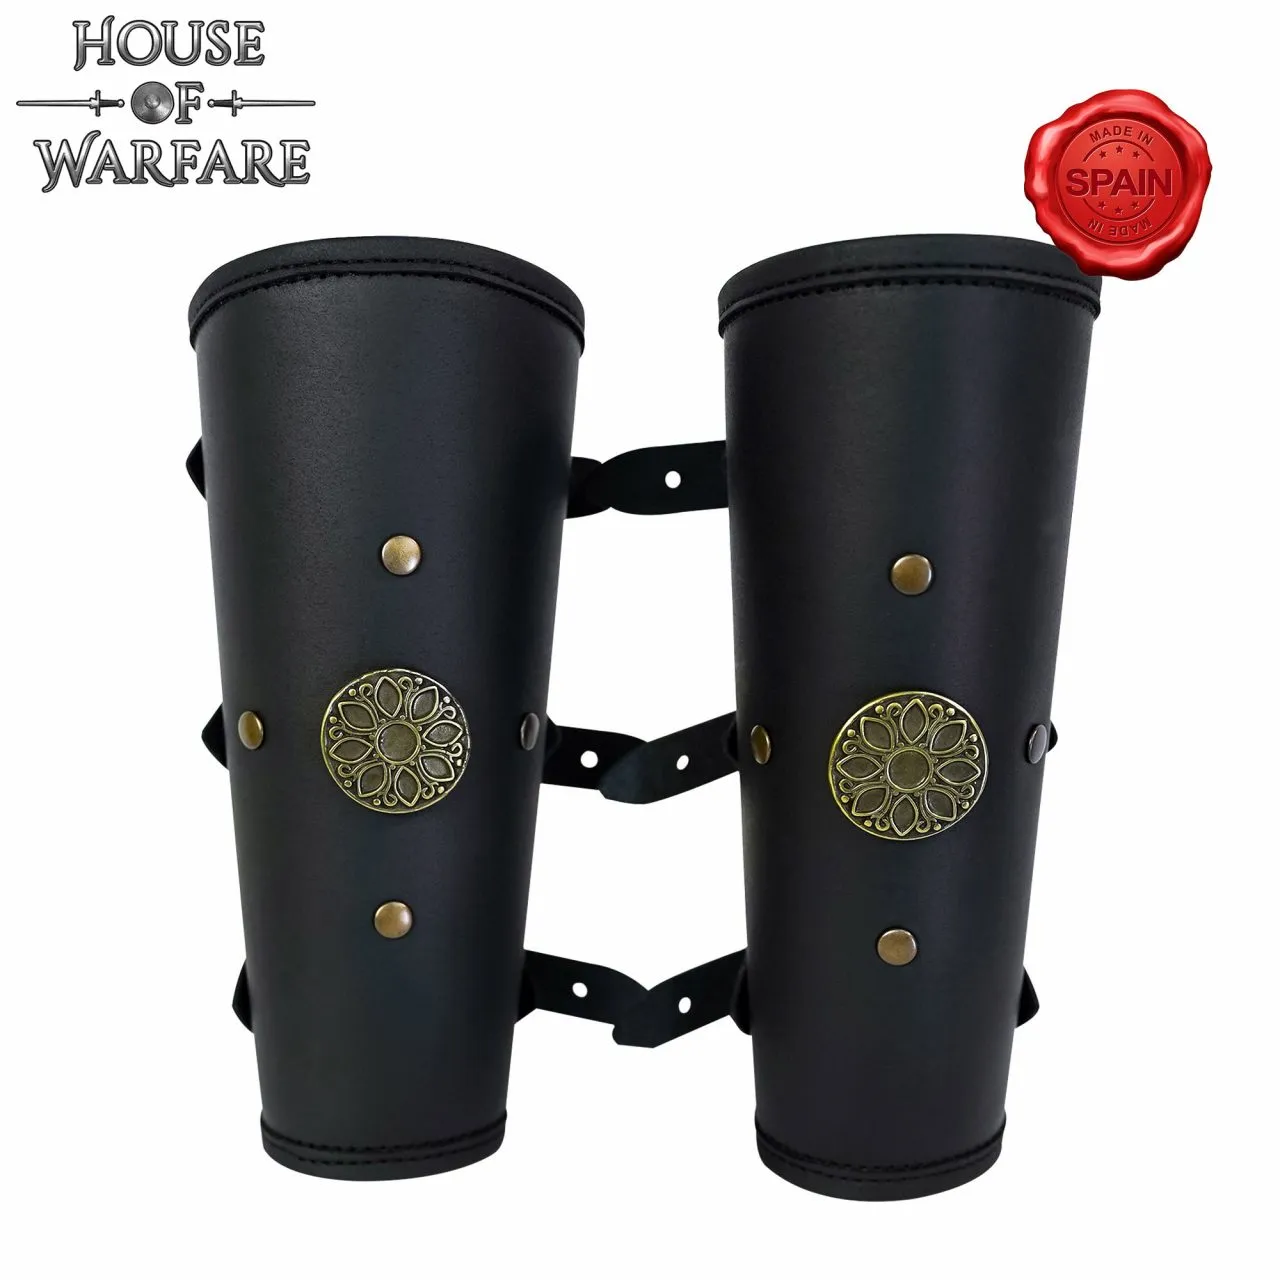 Samurai Leather Bracers, Larp or Cosplay Leather and Metal Pair of